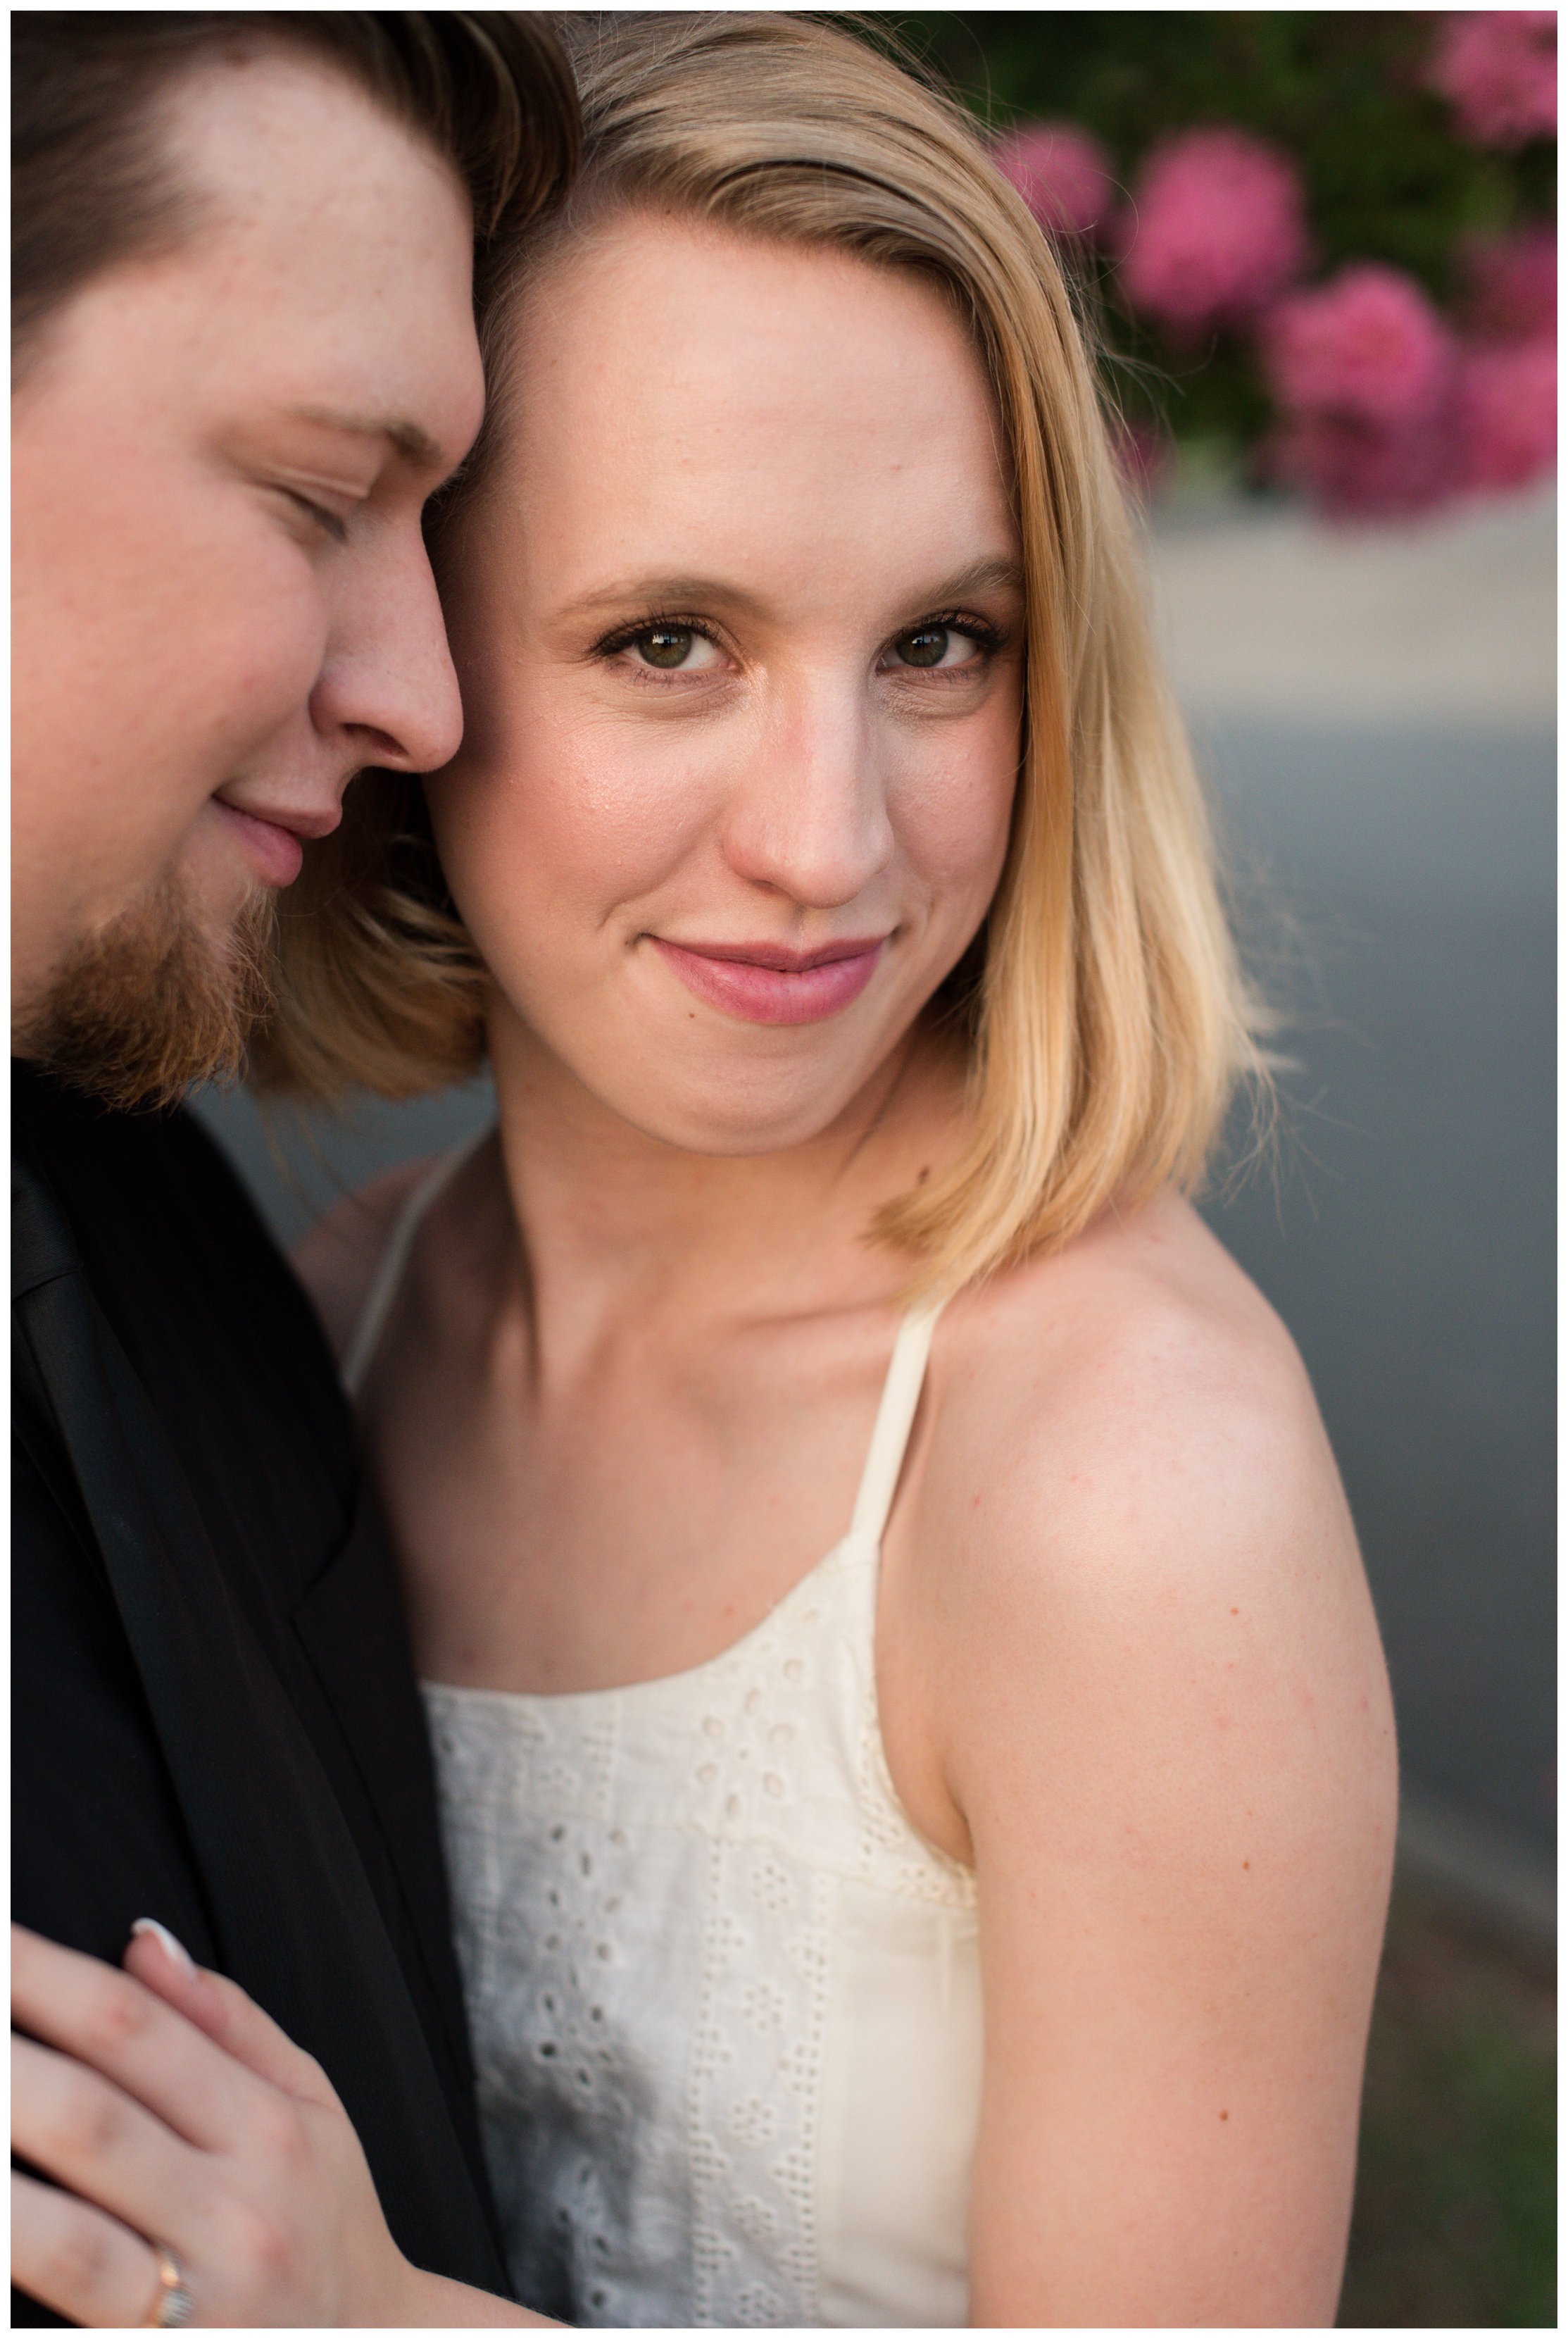 downtown-suffolk-cultural-arts-engagement-session_1257